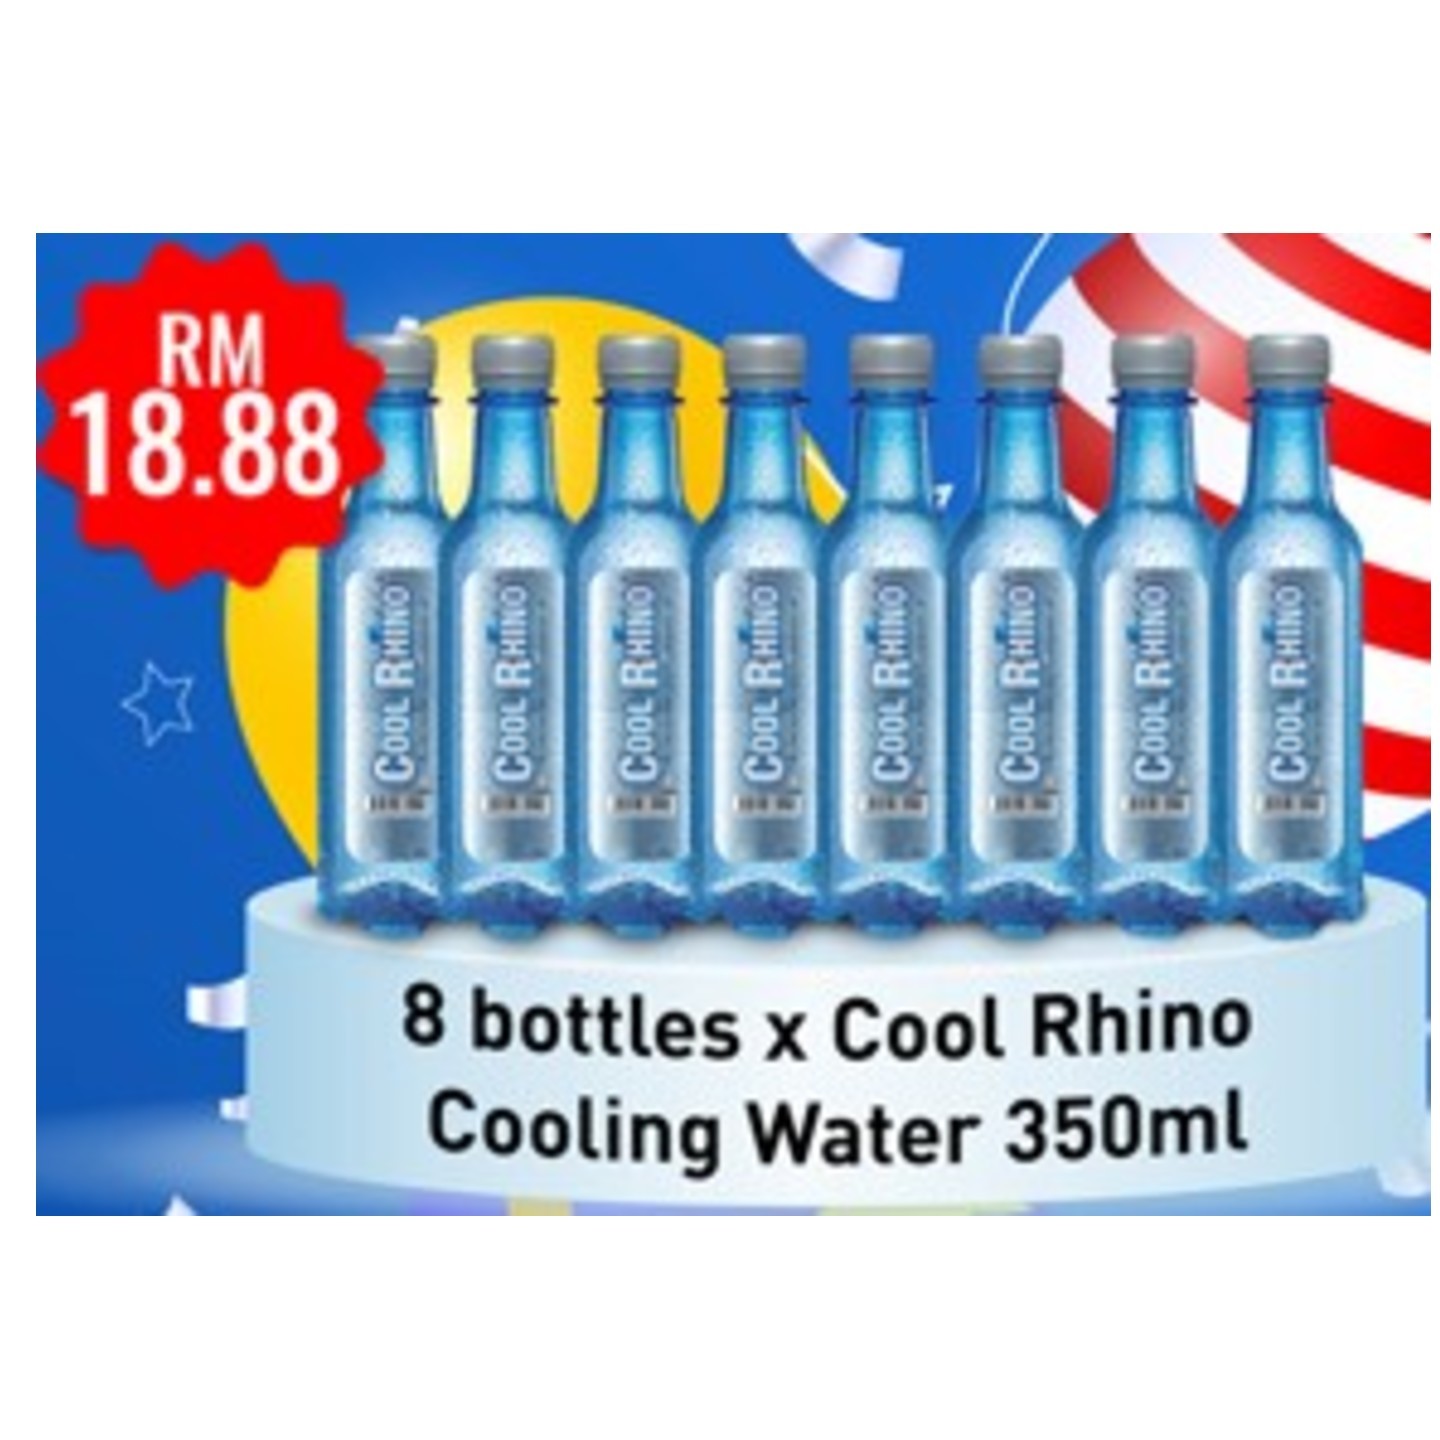 PACKAGE 2: COOL RHINO COOLING WATER 350ML x 8